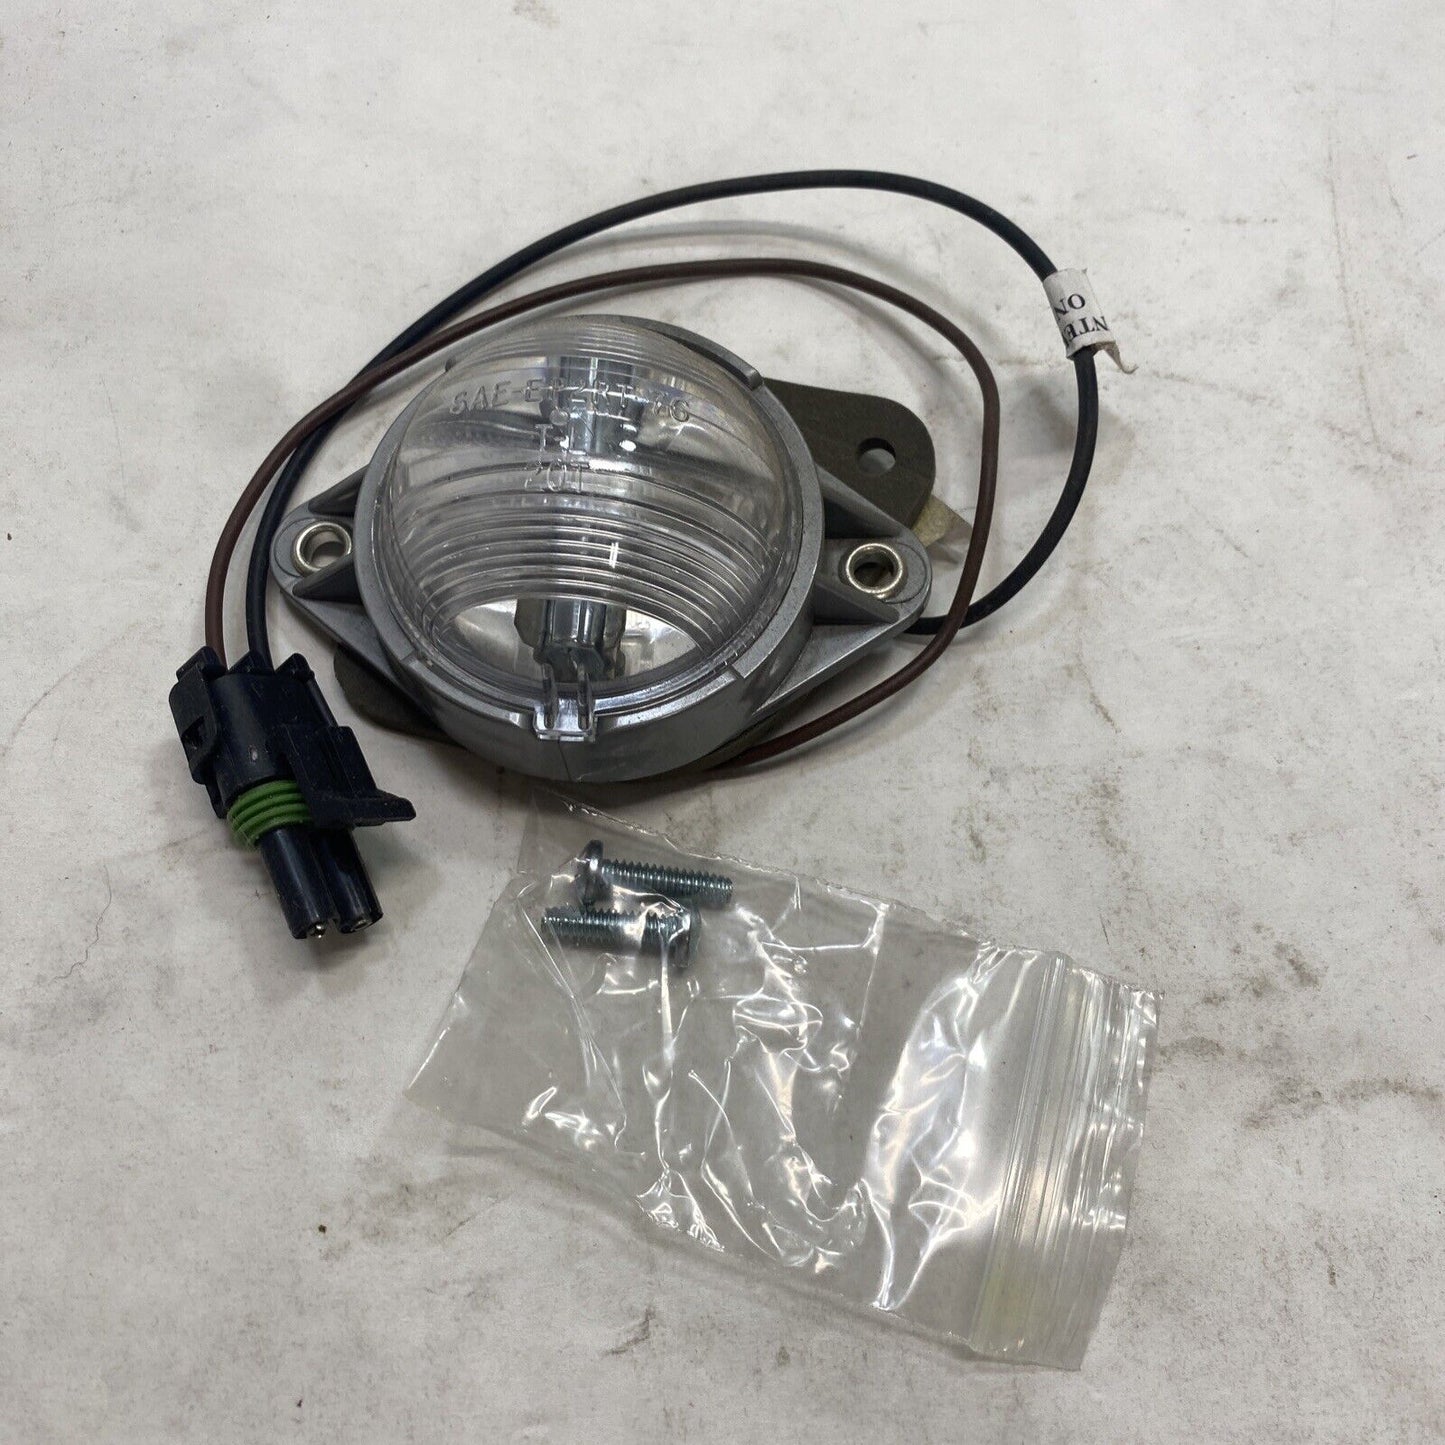 New Flyer Lamp Surface-Mount Interior Engine Lamp Assembly, 114528